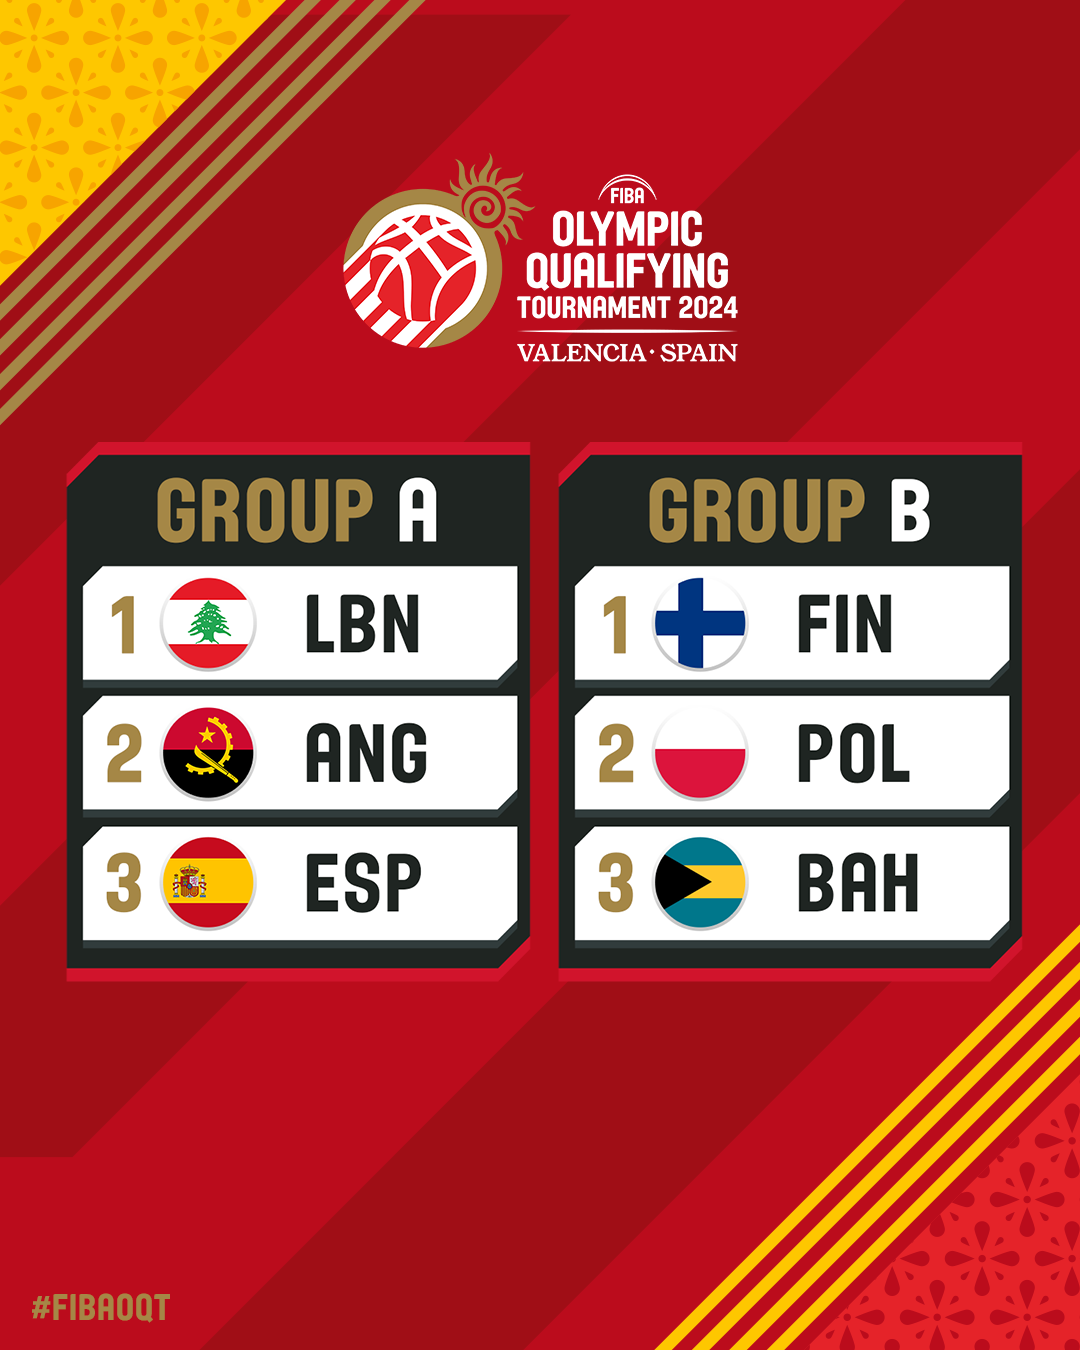 FIBA Olympic Qualifying Tournaments 2024 Draw Completed at FIBA HQ